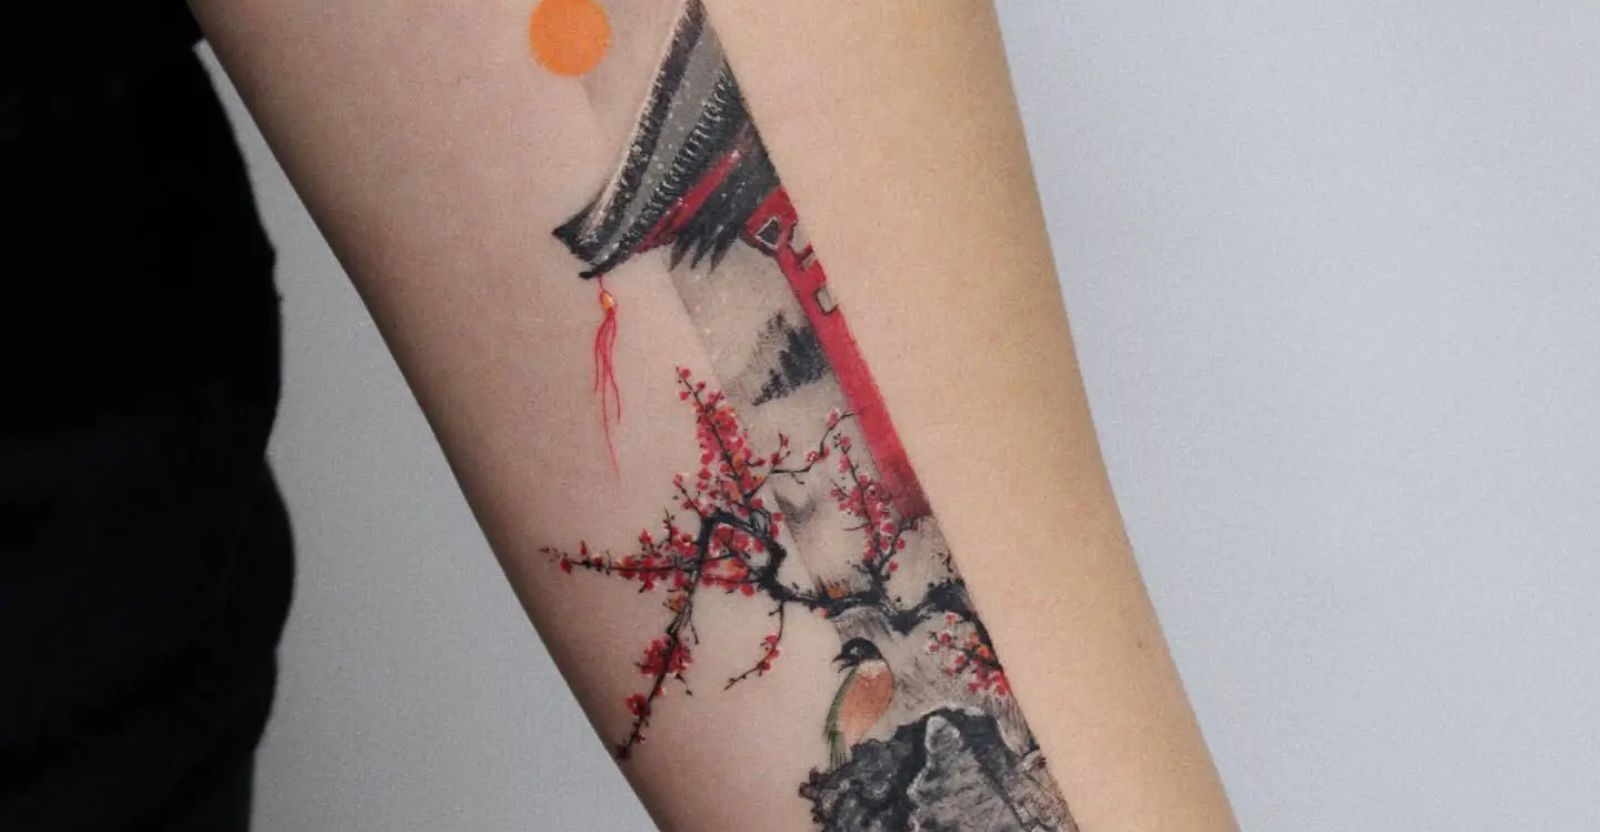 Fruit Tattoos, Tattoo Designs Gallery - Unique Pictures and Ideas